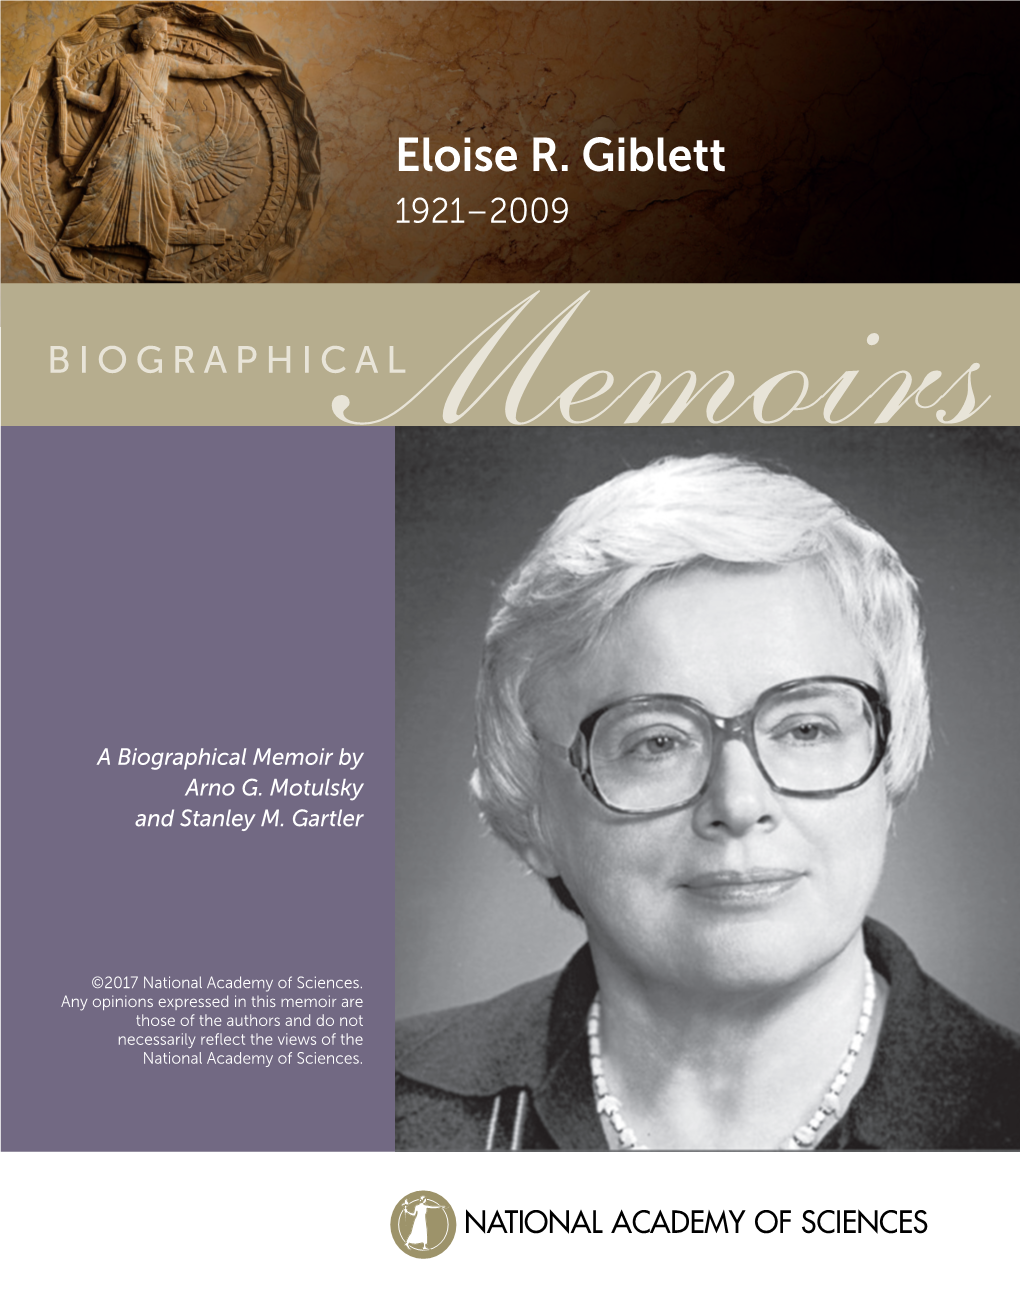 Eloise Giblett, Or Elo As She Preferred to Be Called, Was Born in Tacoma, Washington in 1921